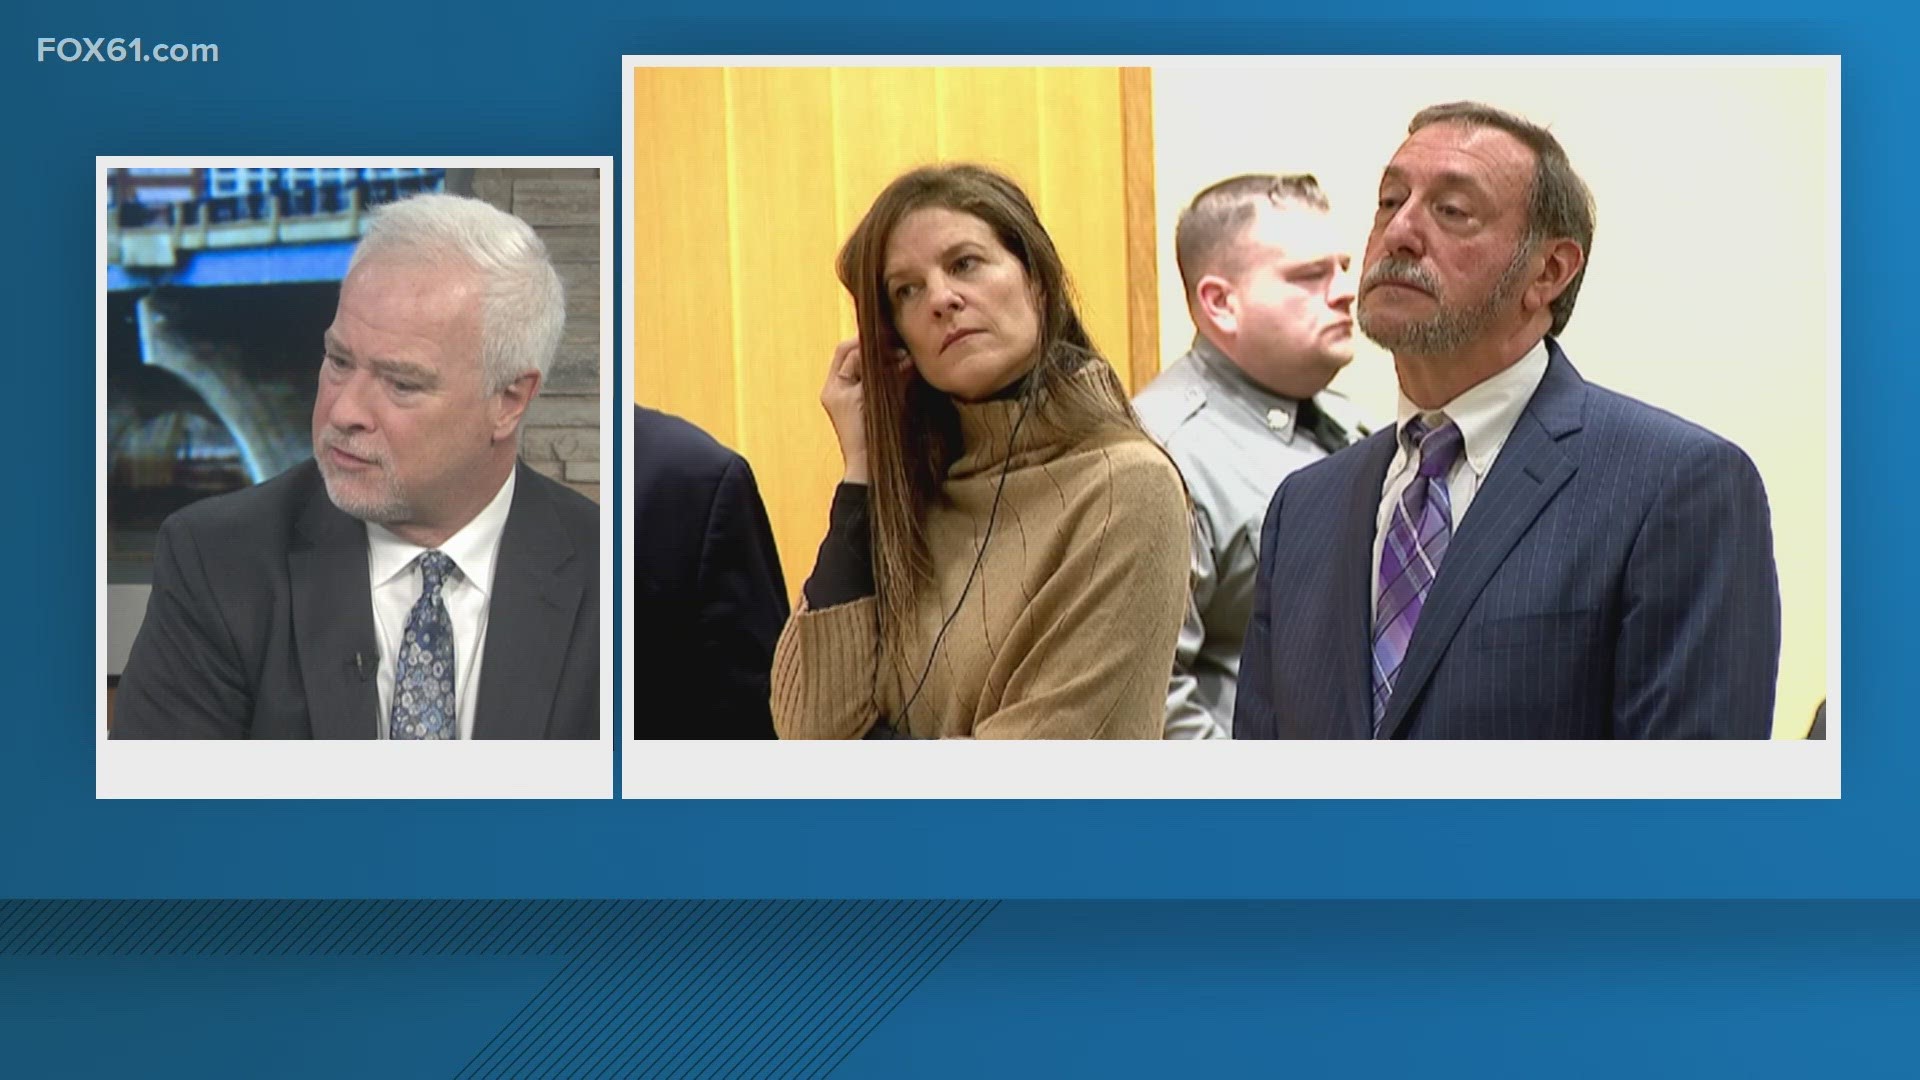 Michelle Troconis faces several charges in connection with the disappearance of Jennifer Dulos. Attorney Ray Hassett discusses what to expect.